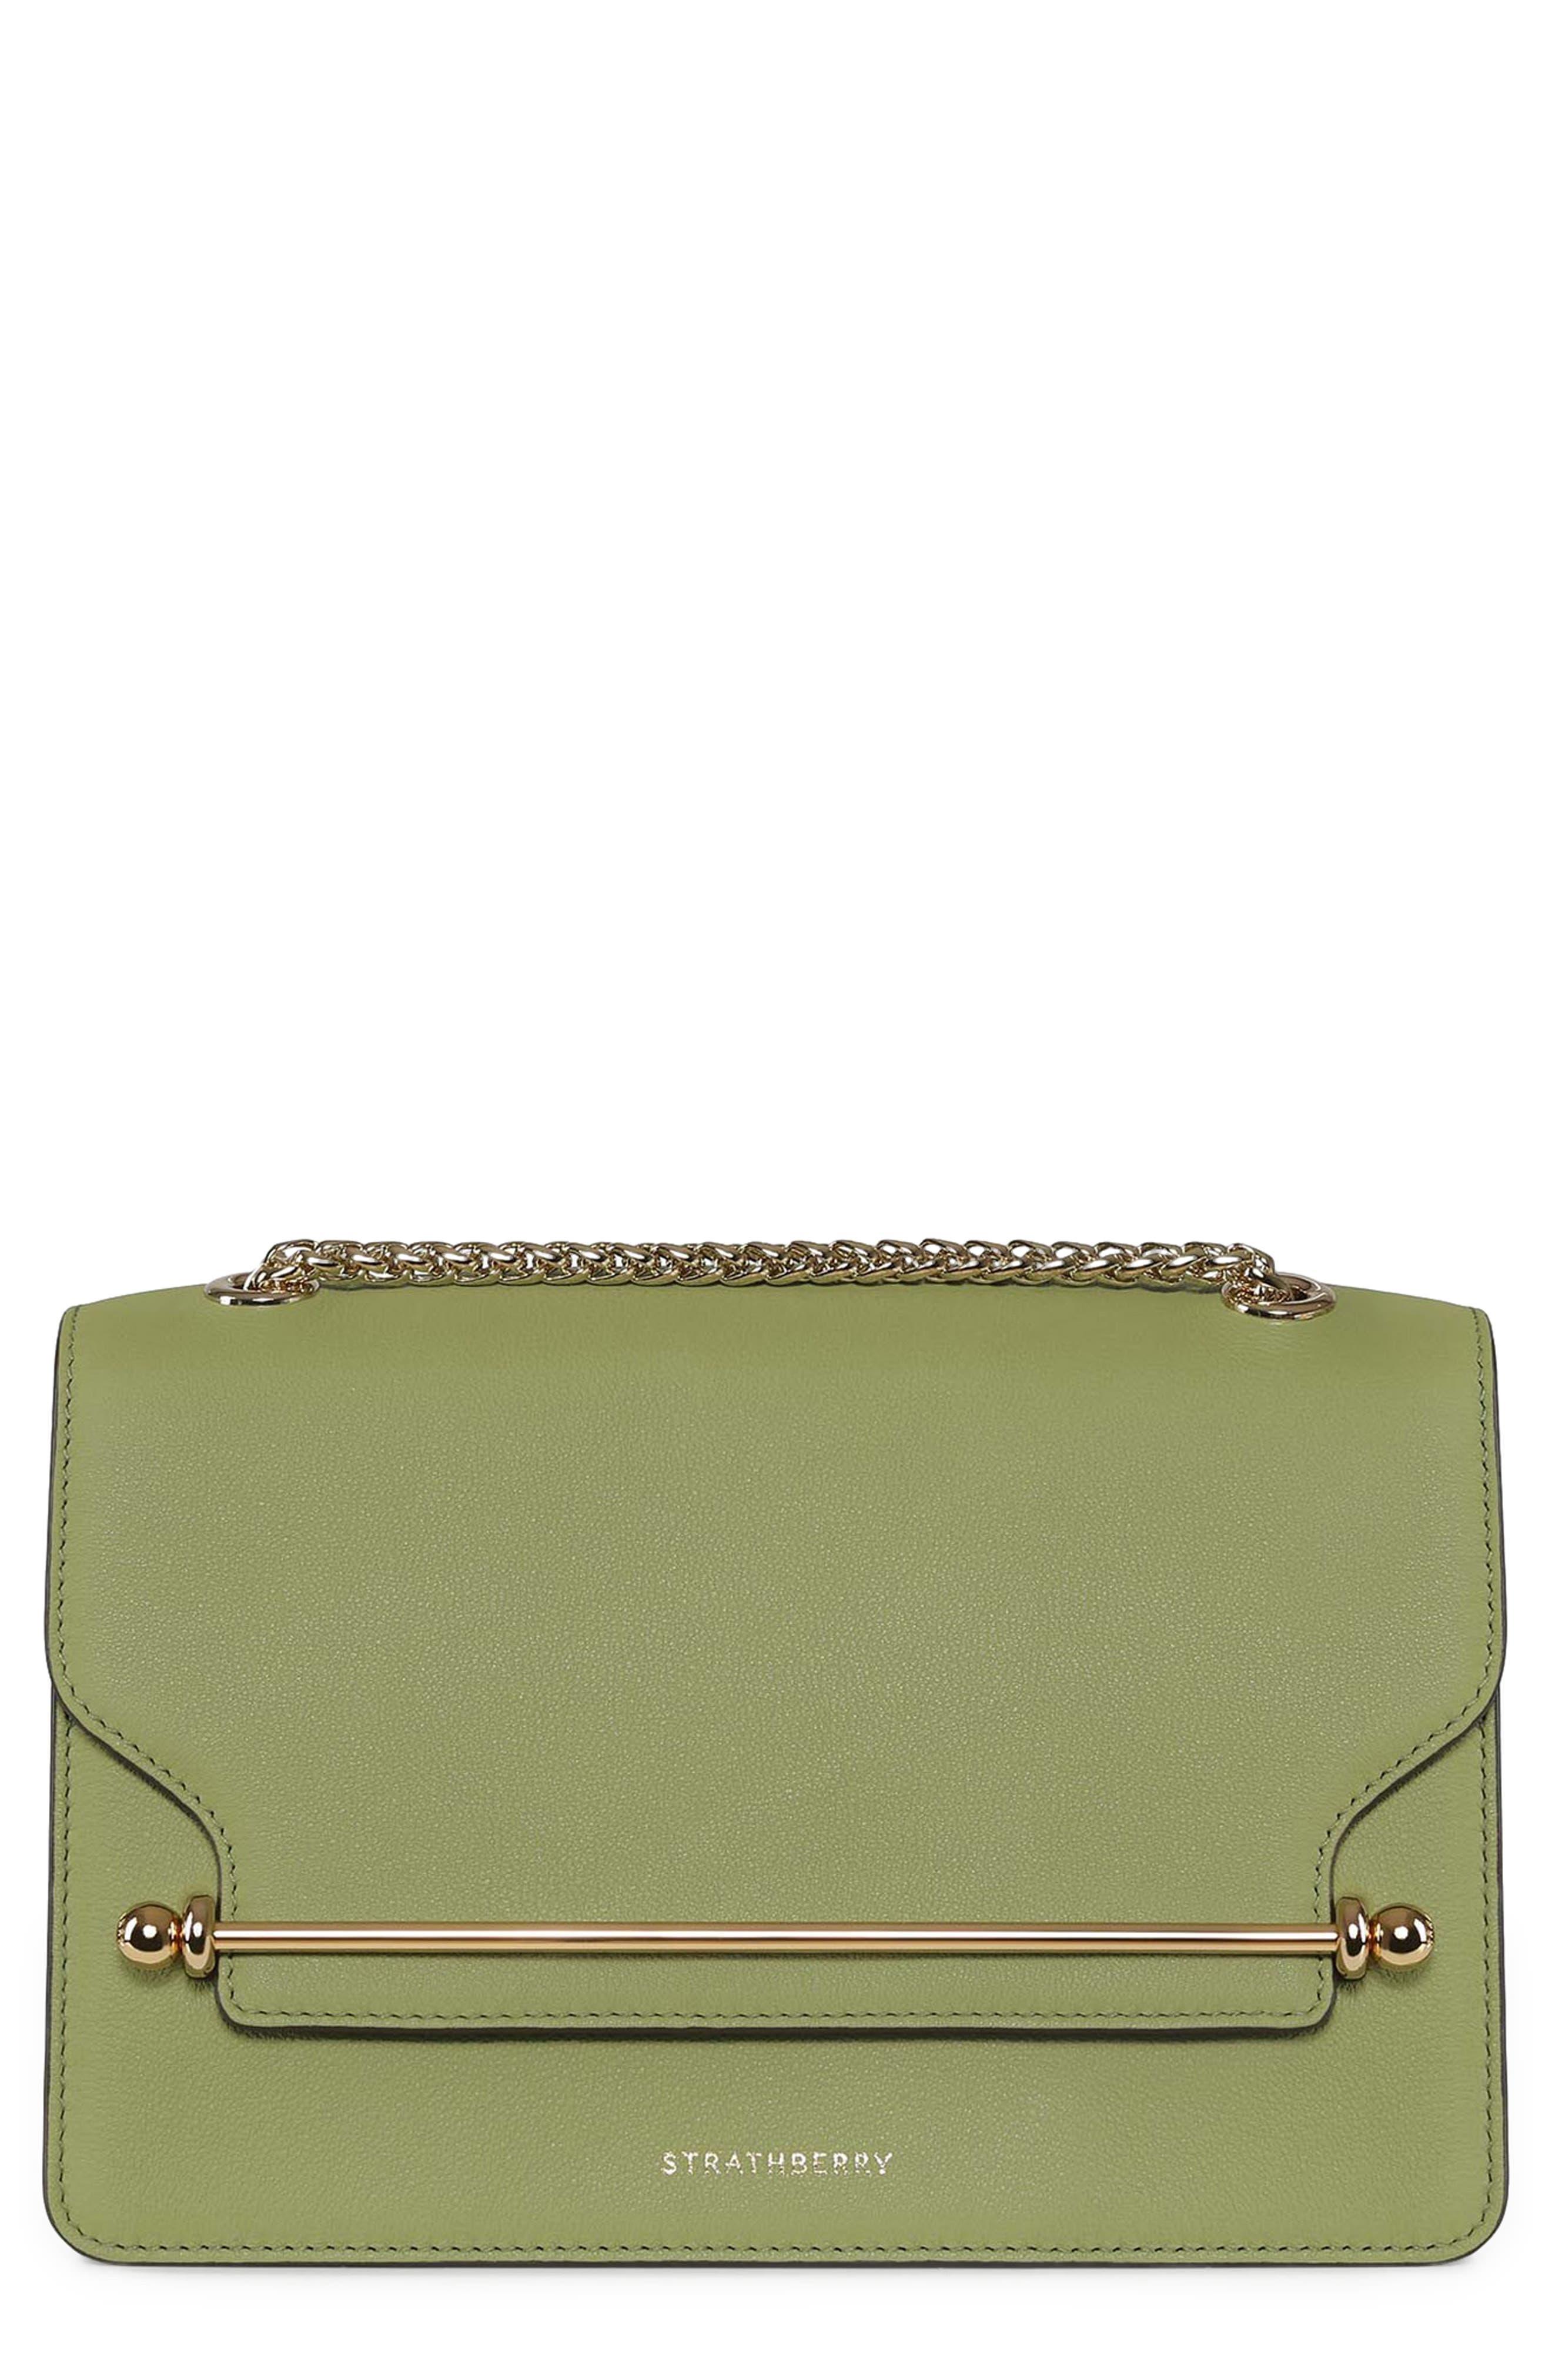 Strathberry East/west Leather Shoulder Bag in Green